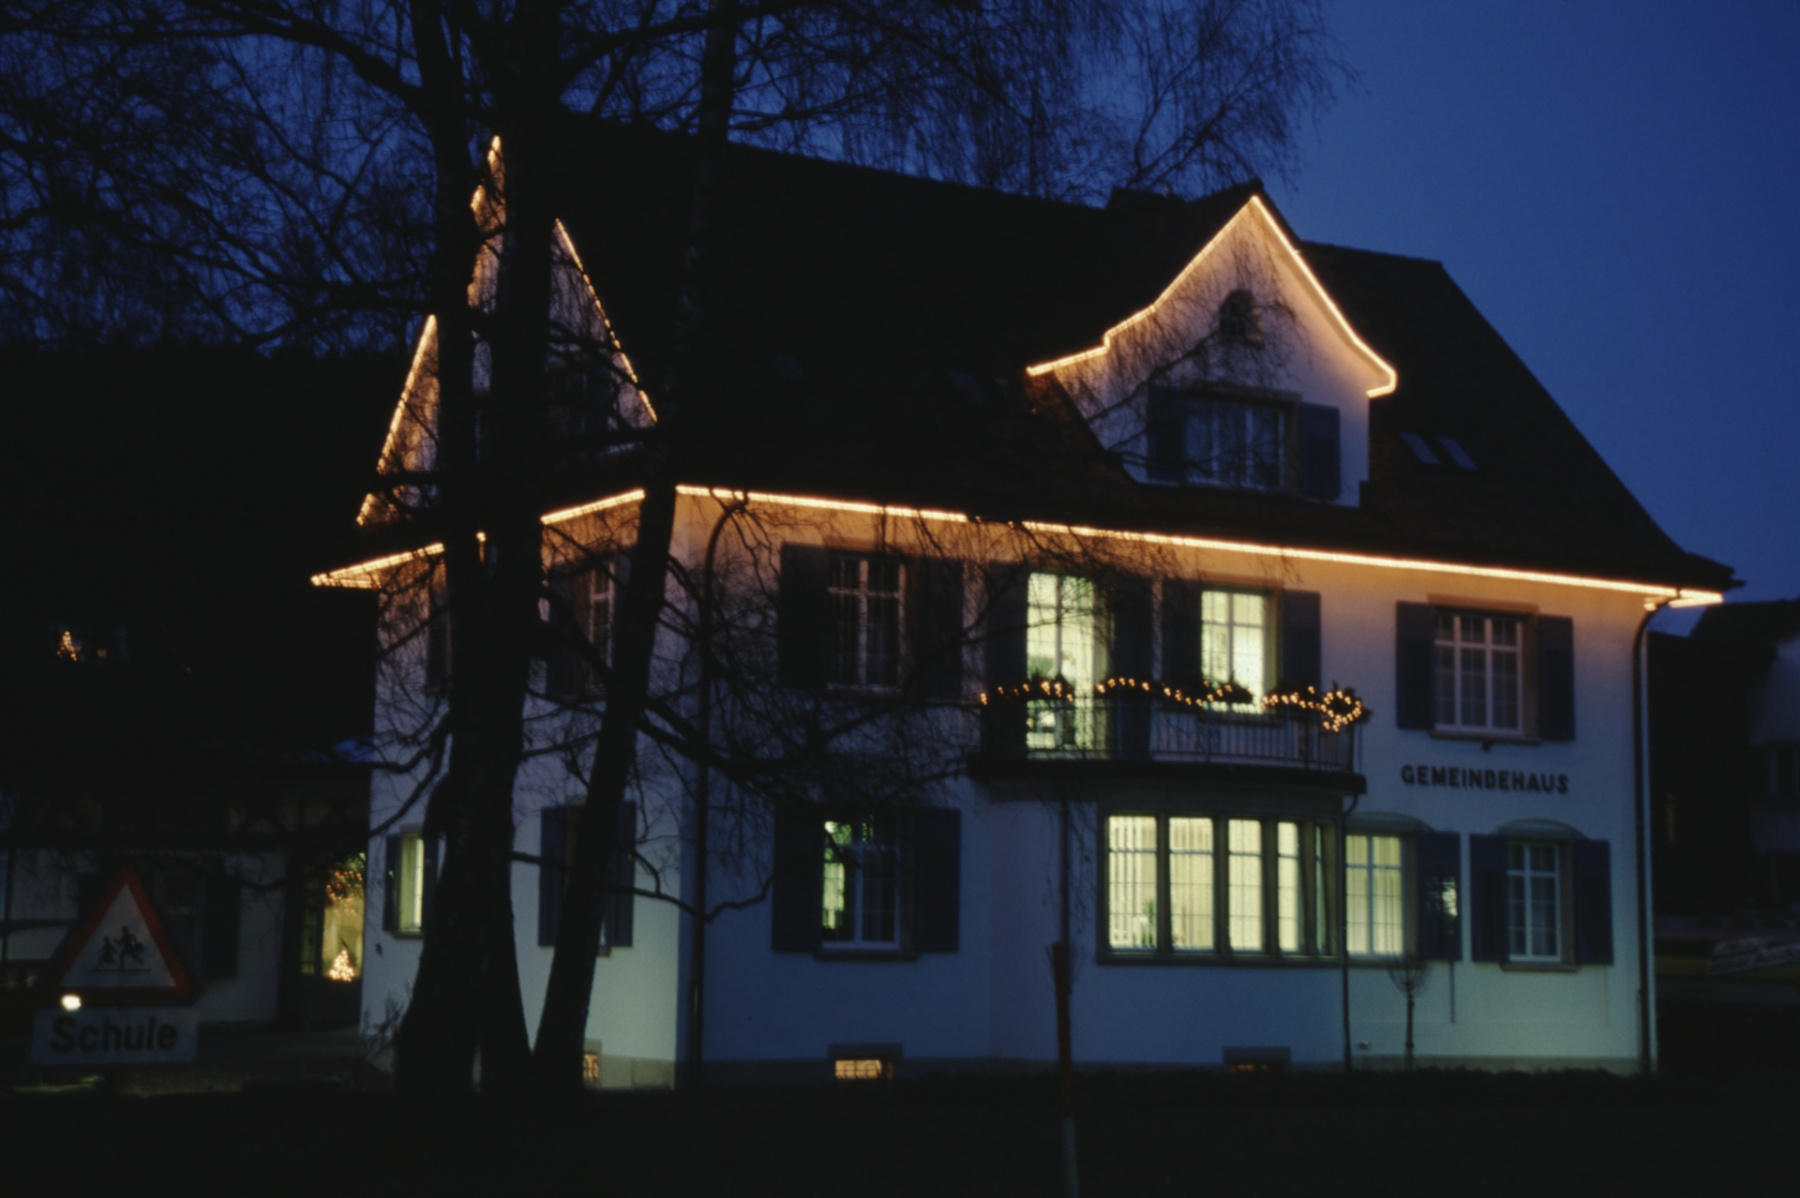 Gemeindehaus by night at Christmastime